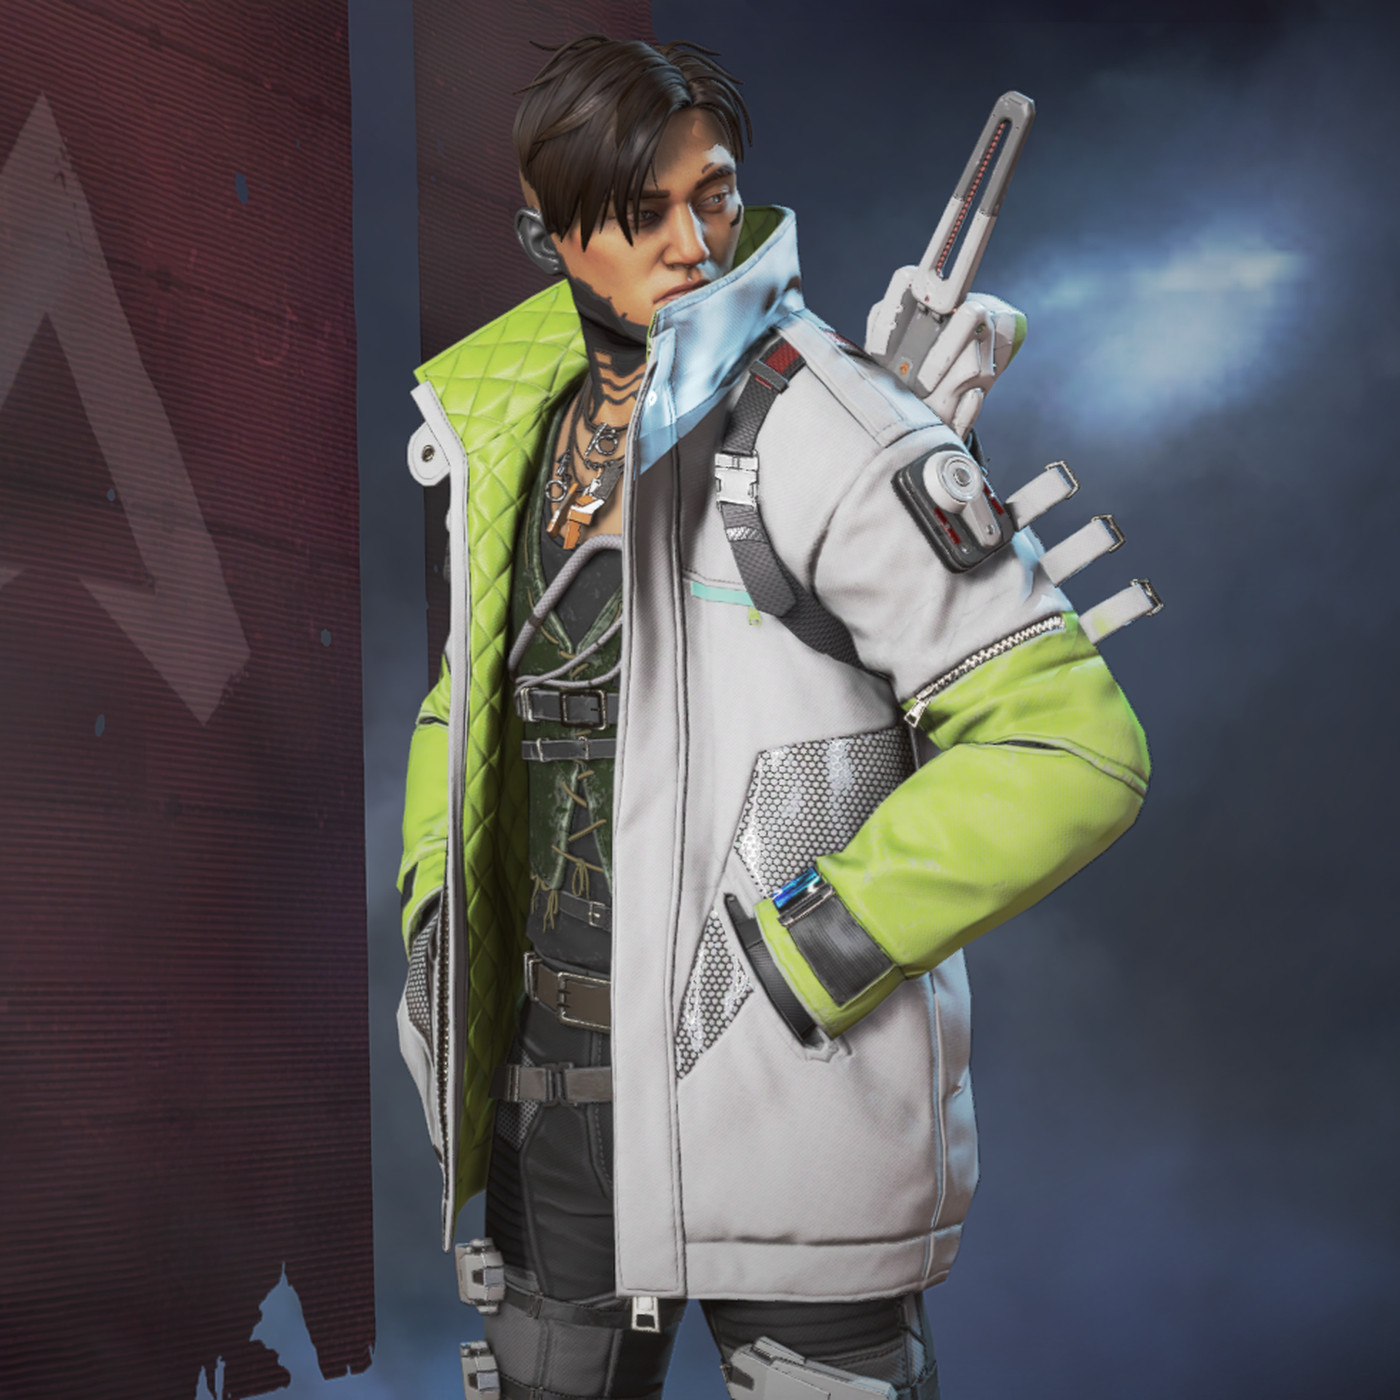 Apex Legends: Crypto abilities and Ultimate - Polygon